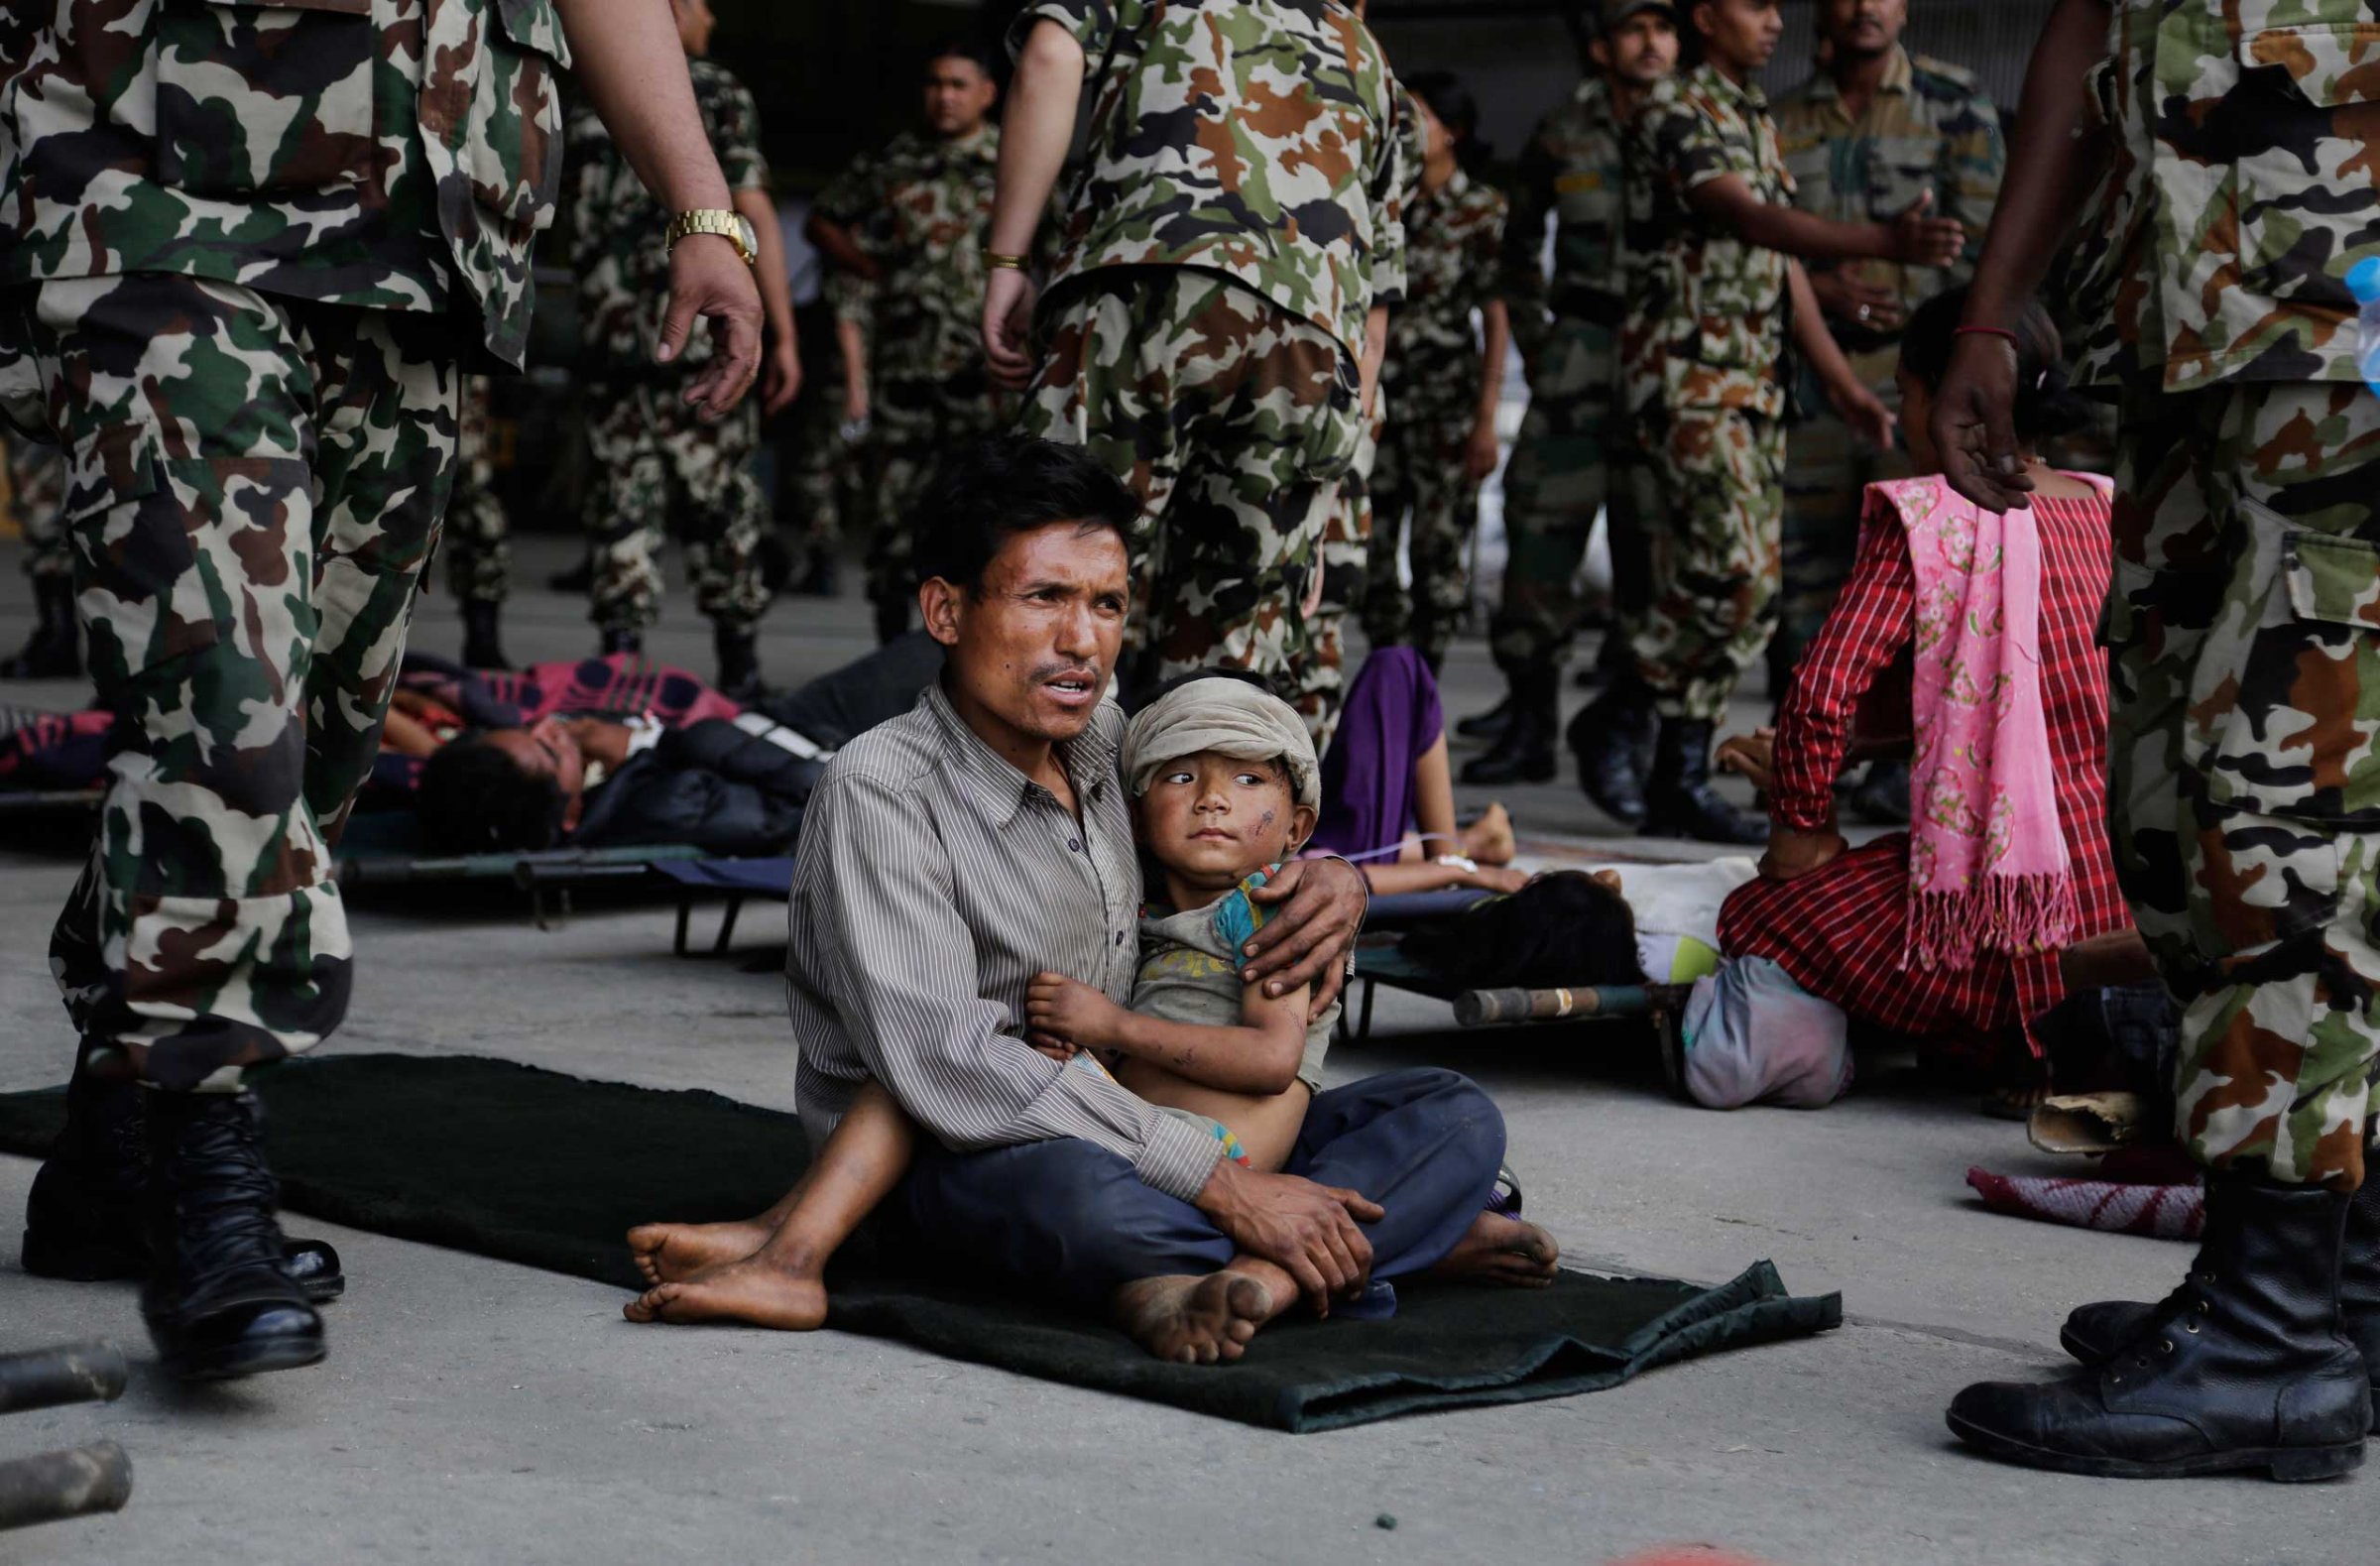 A man sits with a child on his lap as victims of Saturday's earthquake wait for ambulances after being evacuated at the airport in Kathmandu, Nepal, on April 27, 2015.